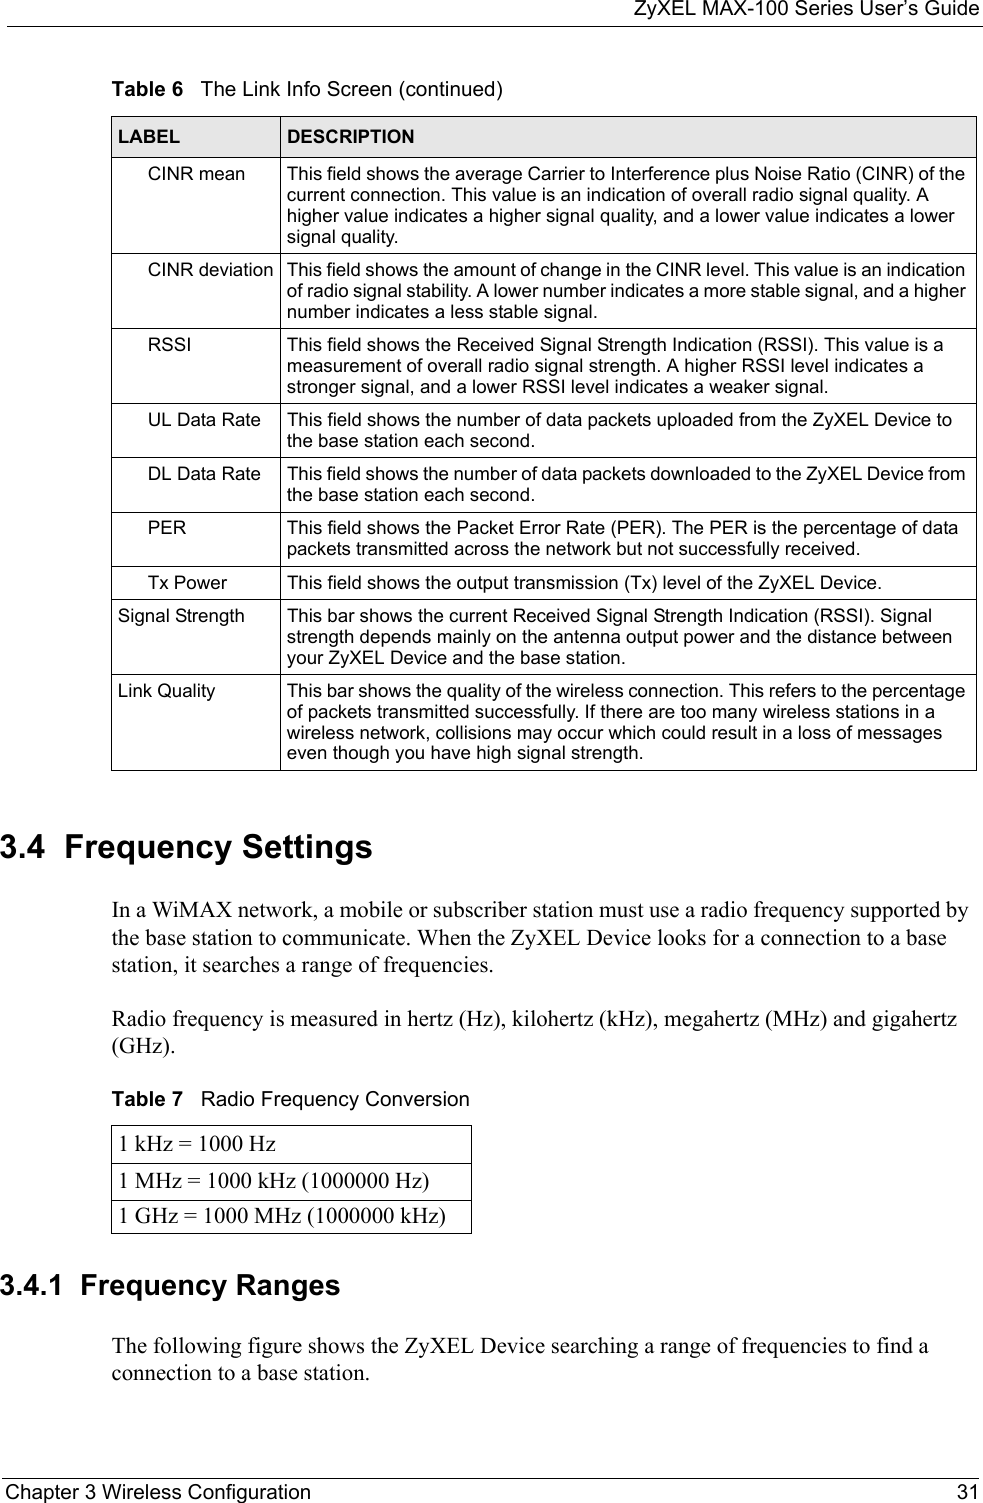 ZyXEL MAX-100 Series User’s GuideChapter 3 Wireless Configuration 313.4  Frequency SettingsIn a WiMAX network, a mobile or subscriber station must use a radio frequency supported by the base station to communicate. When the ZyXEL Device looks for a connection to a base station, it searches a range of frequencies. Radio frequency is measured in hertz (Hz), kilohertz (kHz), megahertz (MHz) and gigahertz (GHz). 3.4.1  Frequency RangesThe following figure shows the ZyXEL Device searching a range of frequencies to find a connection to a base station.  CINR mean This field shows the average Carrier to Interference plus Noise Ratio (CINR) of the current connection. This value is an indication of overall radio signal quality. A higher value indicates a higher signal quality, and a lower value indicates a lower signal quality.CINR deviation This field shows the amount of change in the CINR level. This value is an indication of radio signal stability. A lower number indicates a more stable signal, and a higher number indicates a less stable signal. RSSI This field shows the Received Signal Strength Indication (RSSI). This value is a measurement of overall radio signal strength. A higher RSSI level indicates a stronger signal, and a lower RSSI level indicates a weaker signal.UL Data Rate This field shows the number of data packets uploaded from the ZyXEL Device to the base station each second.DL Data Rate This field shows the number of data packets downloaded to the ZyXEL Device from the base station each second.PER This field shows the Packet Error Rate (PER). The PER is the percentage of data packets transmitted across the network but not successfully received.Tx Power This field shows the output transmission (Tx) level of the ZyXEL Device.Signal Strength This bar shows the current Received Signal Strength Indication (RSSI). Signal strength depends mainly on the antenna output power and the distance between your ZyXEL Device and the base station.Link Quality This bar shows the quality of the wireless connection. This refers to the percentage of packets transmitted successfully. If there are too many wireless stations in a wireless network, collisions may occur which could result in a loss of messages even though you have high signal strength.Table 6   The Link Info Screen (continued)LABEL DESCRIPTIONTable 7   Radio Frequency Conversion1 kHz = 1000 Hz1 MHz = 1000 kHz (1000000 Hz)1 GHz = 1000 MHz (1000000 kHz)